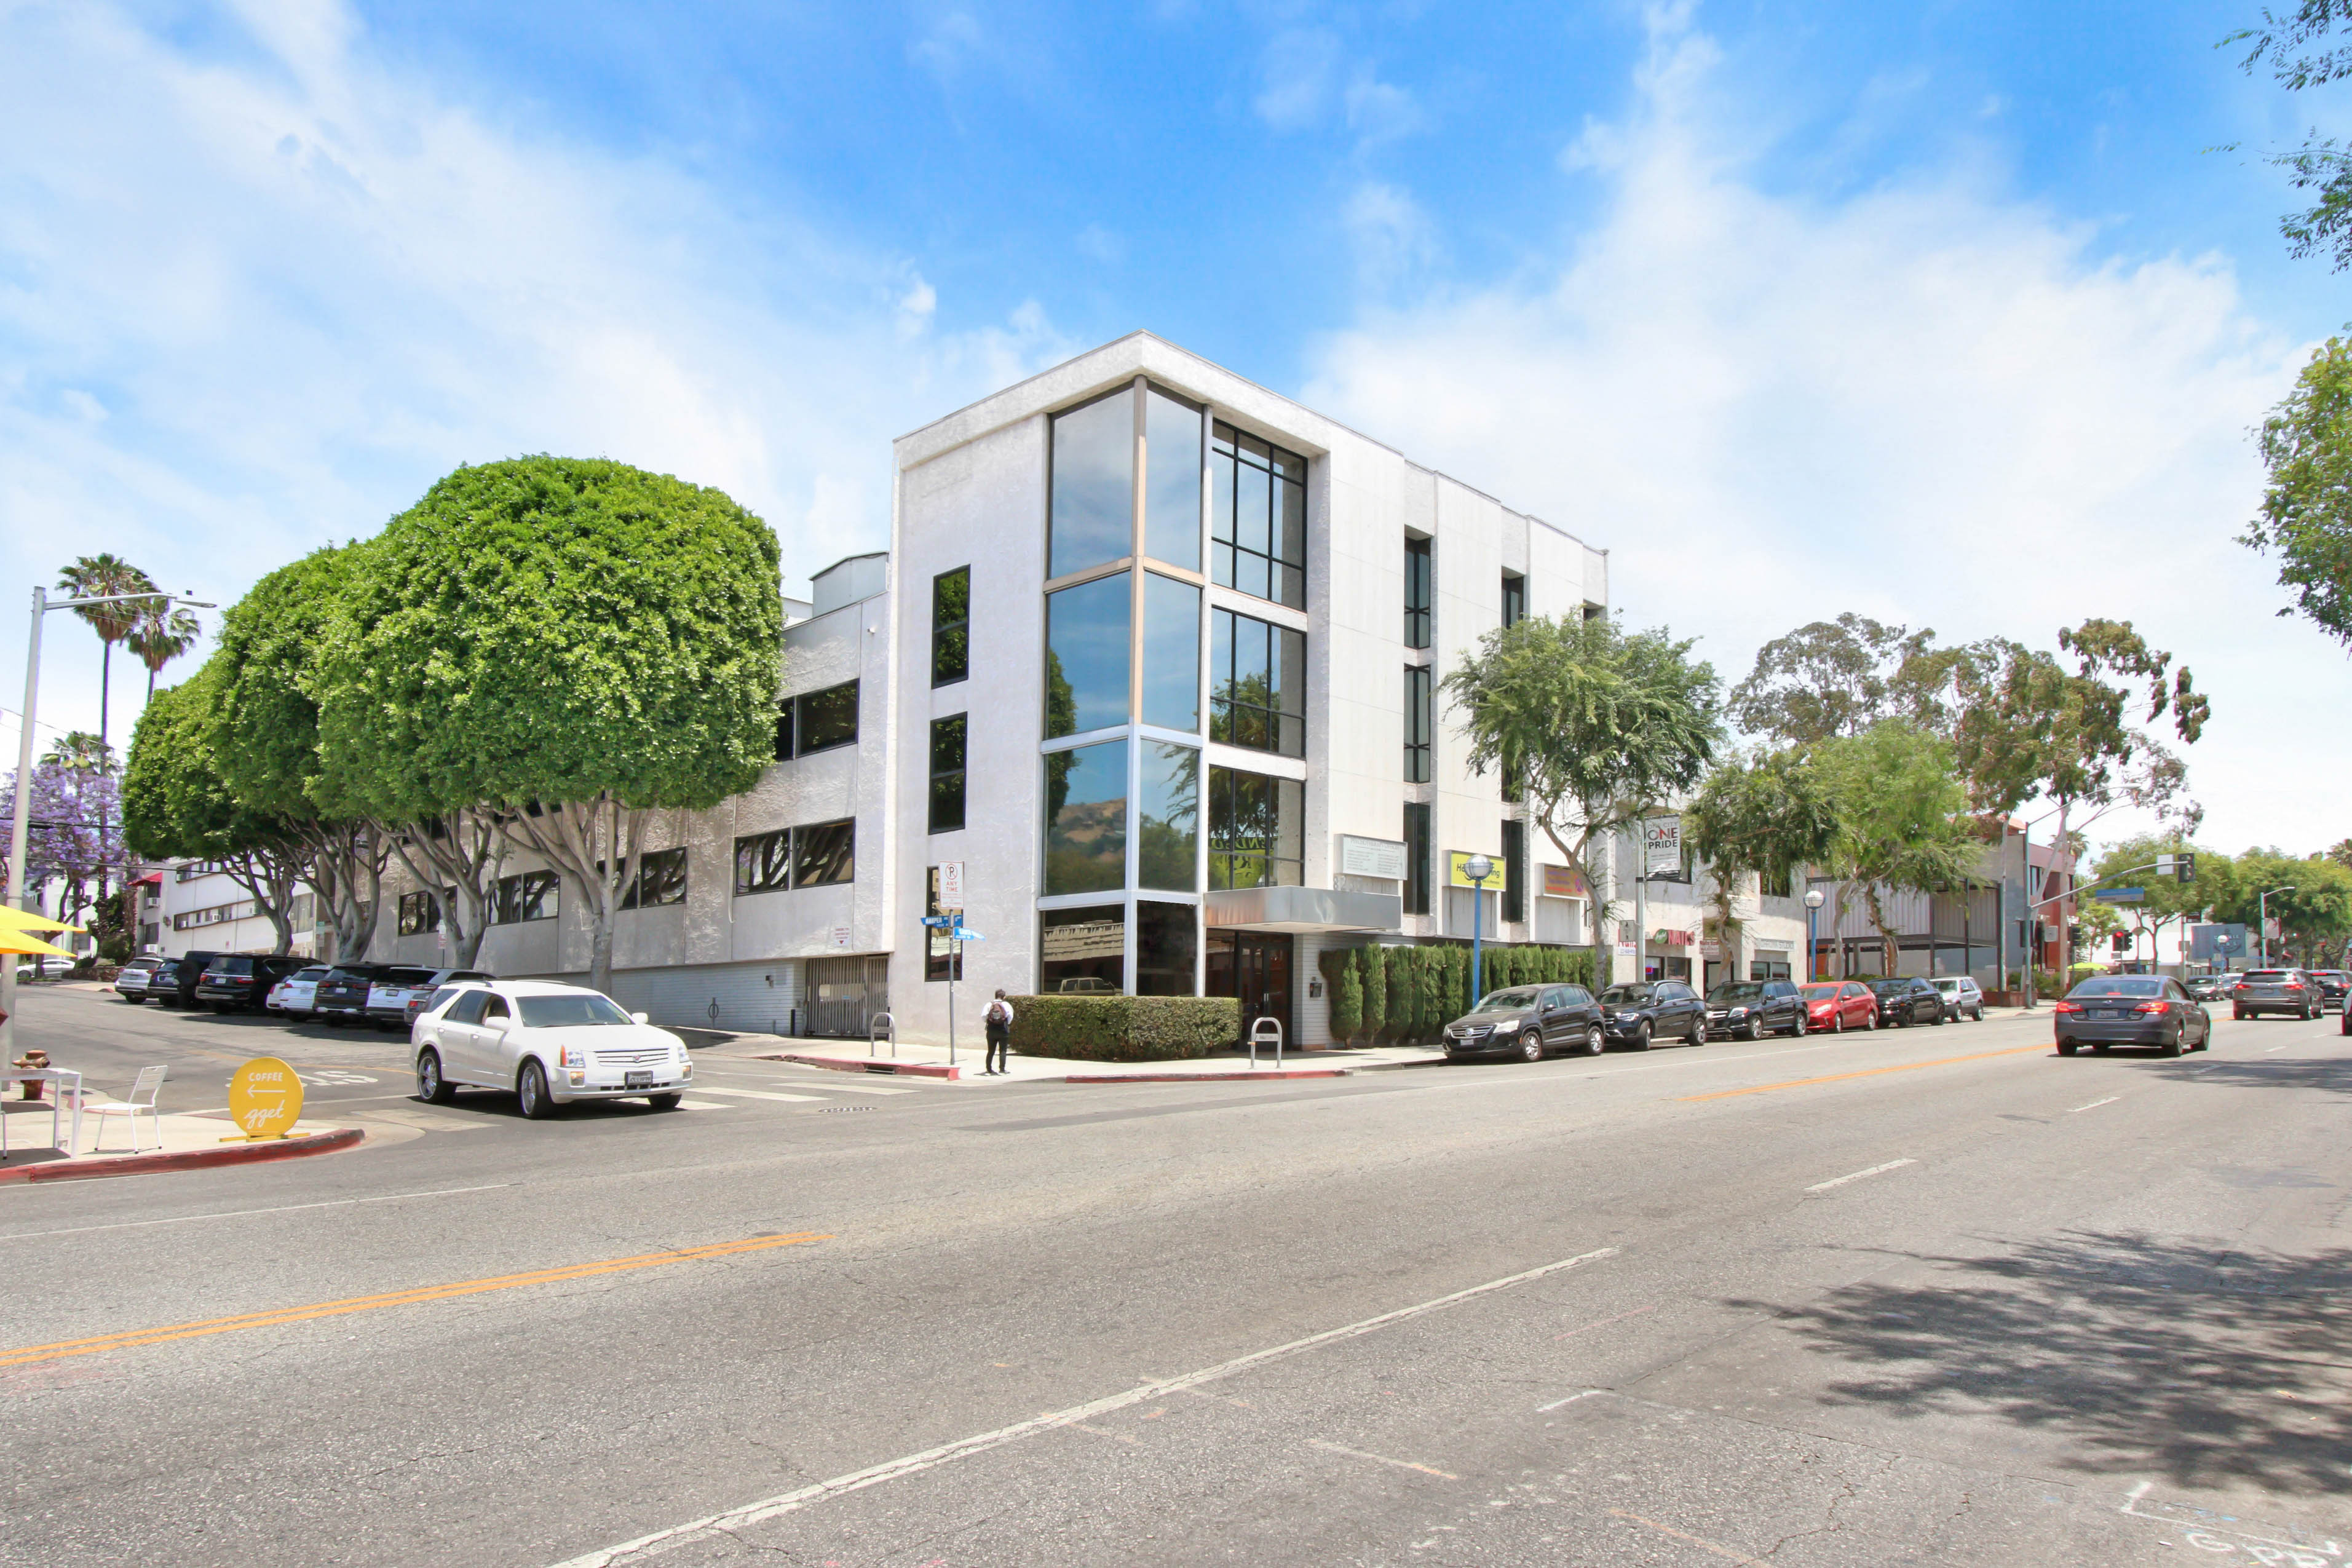 WESTMAC COMMERCIAL BROKERAGE COMPANY ARRANGES $11.5 MILLION SALE OF TWO COMMERCIAL BUILDINGS IN WEST HOLLYWOOD, CA